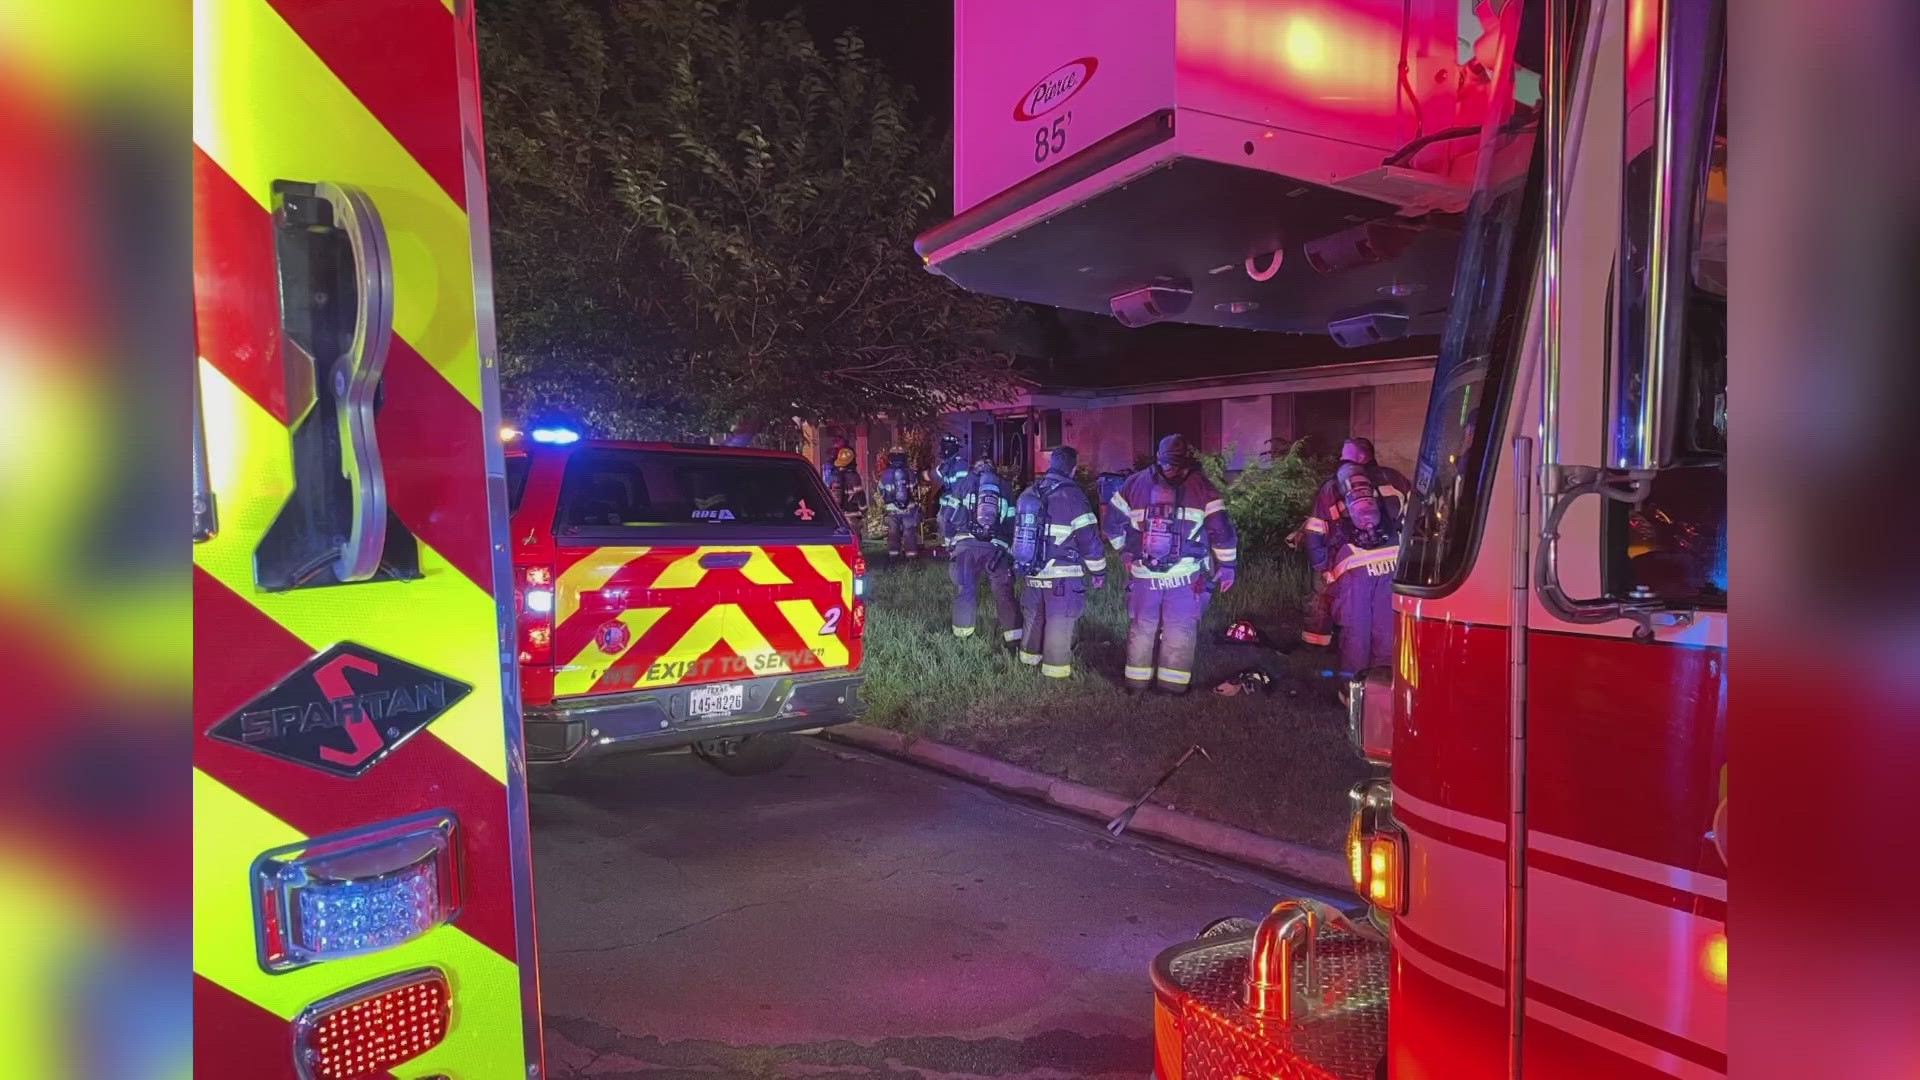 Crews were called out to the 1900 block of Rambler drive, in reference to a structure fire just before 4 a.m. Thursday, May 25.